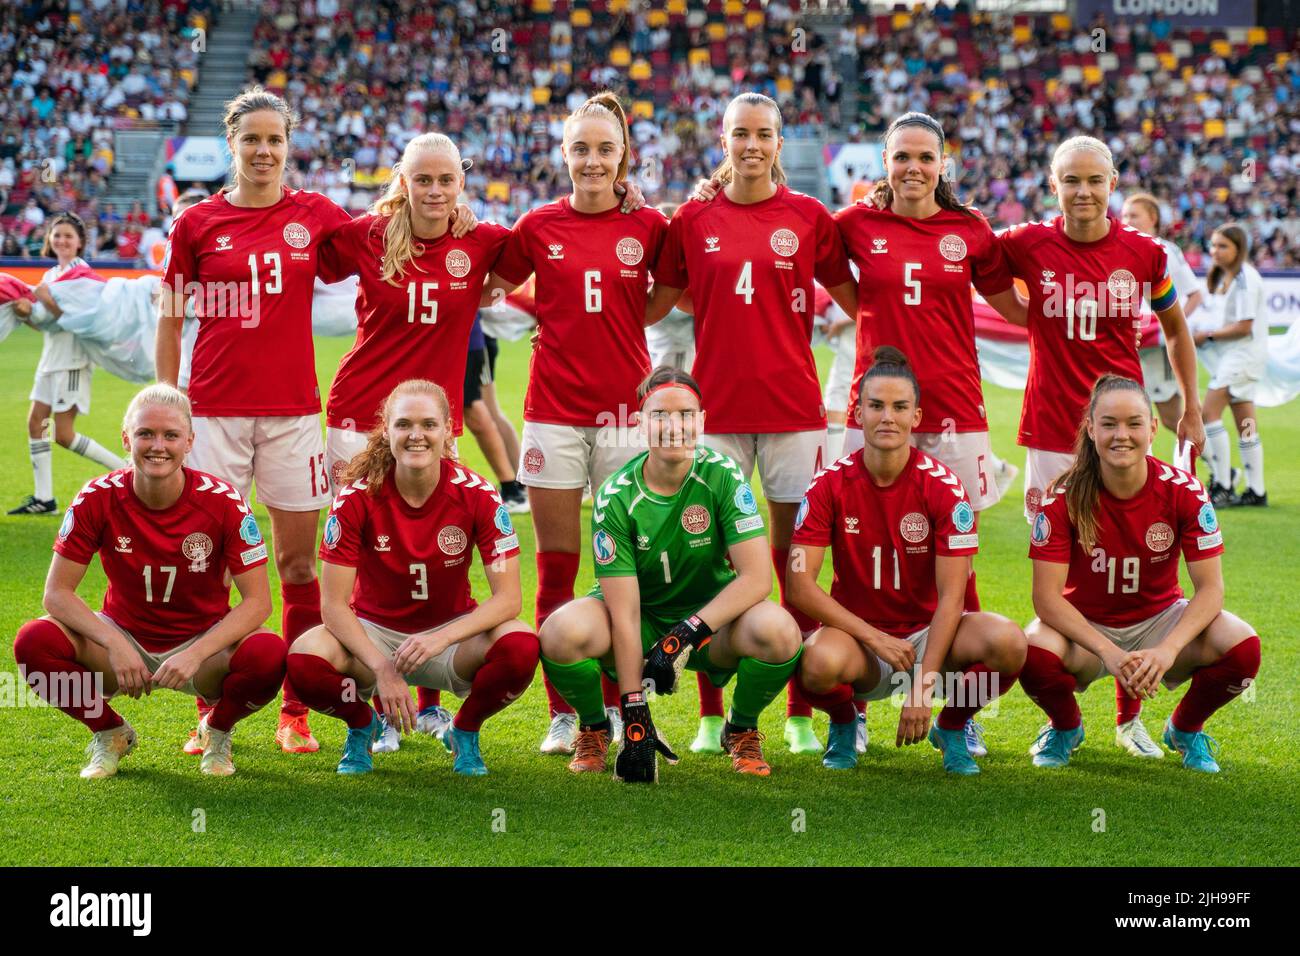 Brentford, UK. 16th July, 2022. Denmark starting line up during the UEFA Womens Euro 2022 football match between Denmark and Spain at the Brentford Community Stadium in Brentford, England. (Foto: Sam Mallia/Sports Press Photo/C - ONE HOUR DEADLINE - ONLY ACTIVATE FTP IF IMAGES LESS THAN ONE HOUR OLD - Alamy) Credit: SPP Sport Press Photo. /Alamy Live News Stock Photo